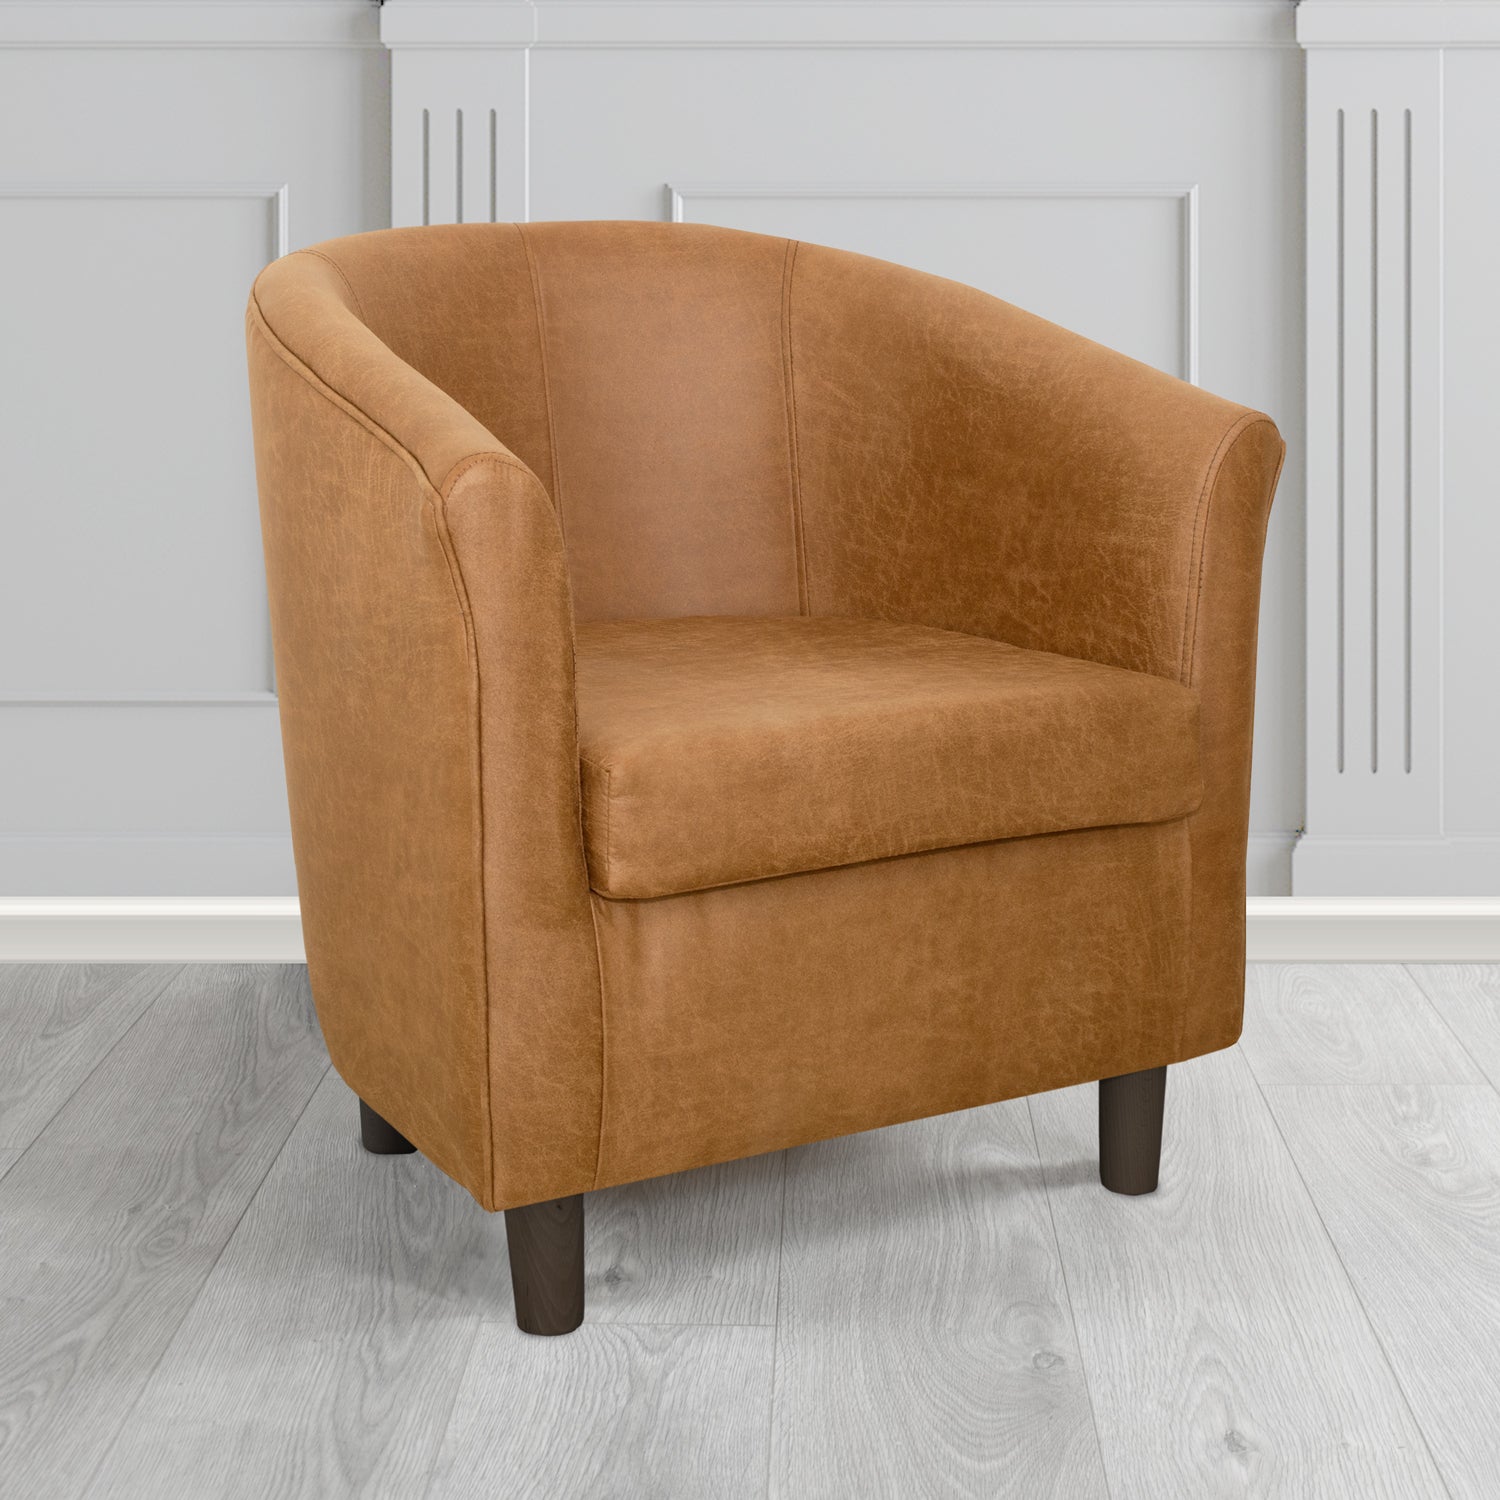 Tuscany Nevada Rust Faux Leather Tub Chair - The Tub Chair Shop